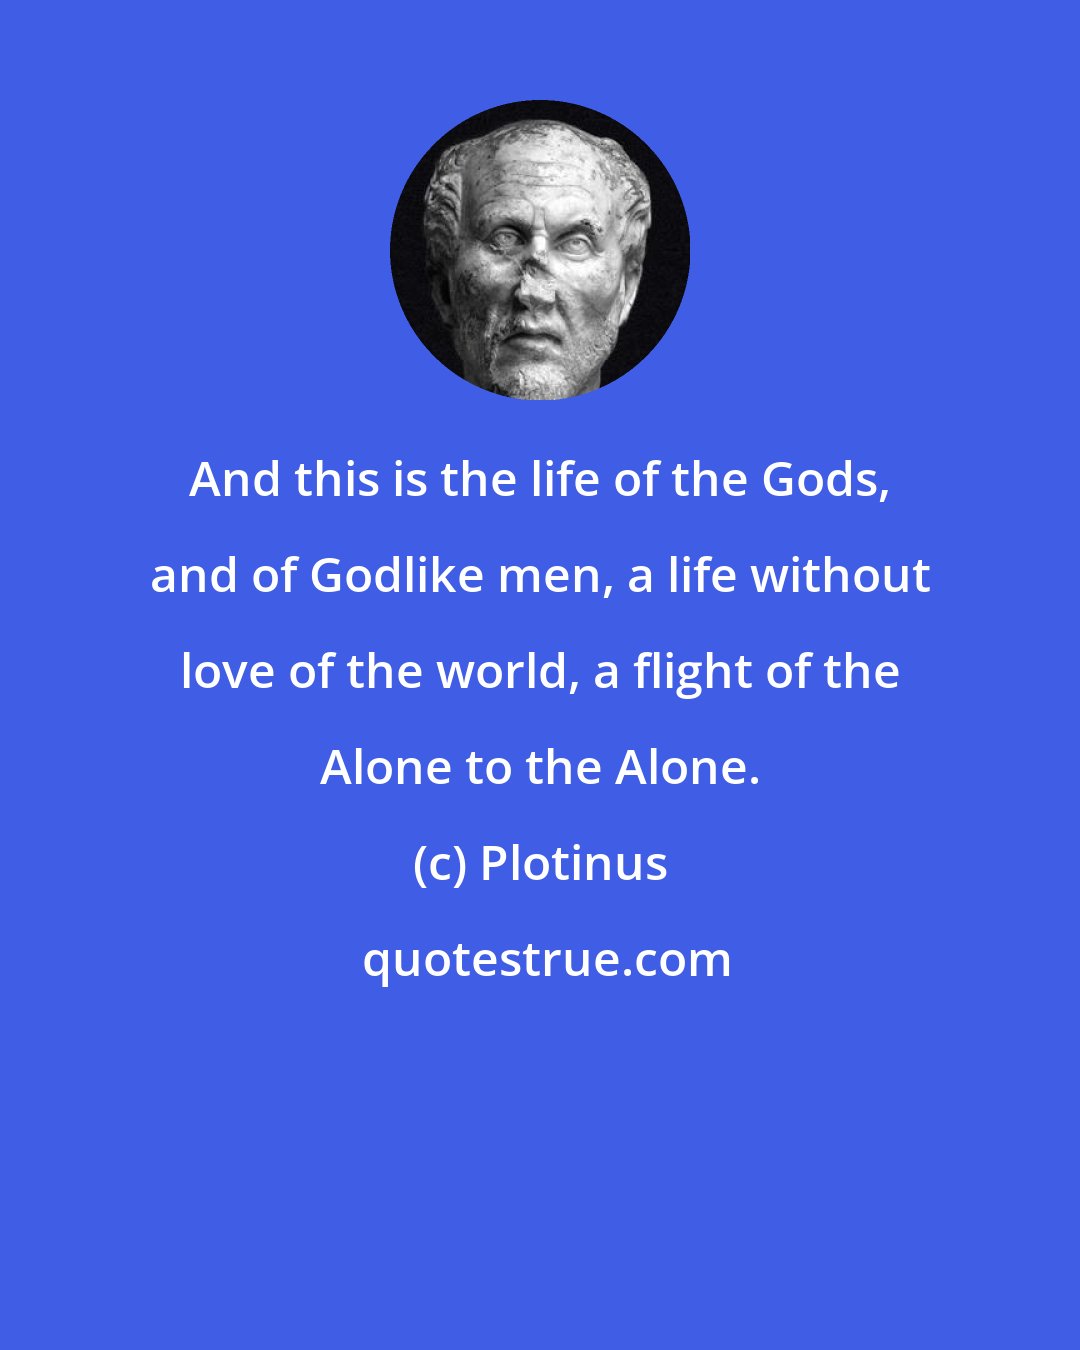 Plotinus: And this is the life of the Gods, and of Godlike men, a life without love of the world, a flight of the Alone to the Alone.